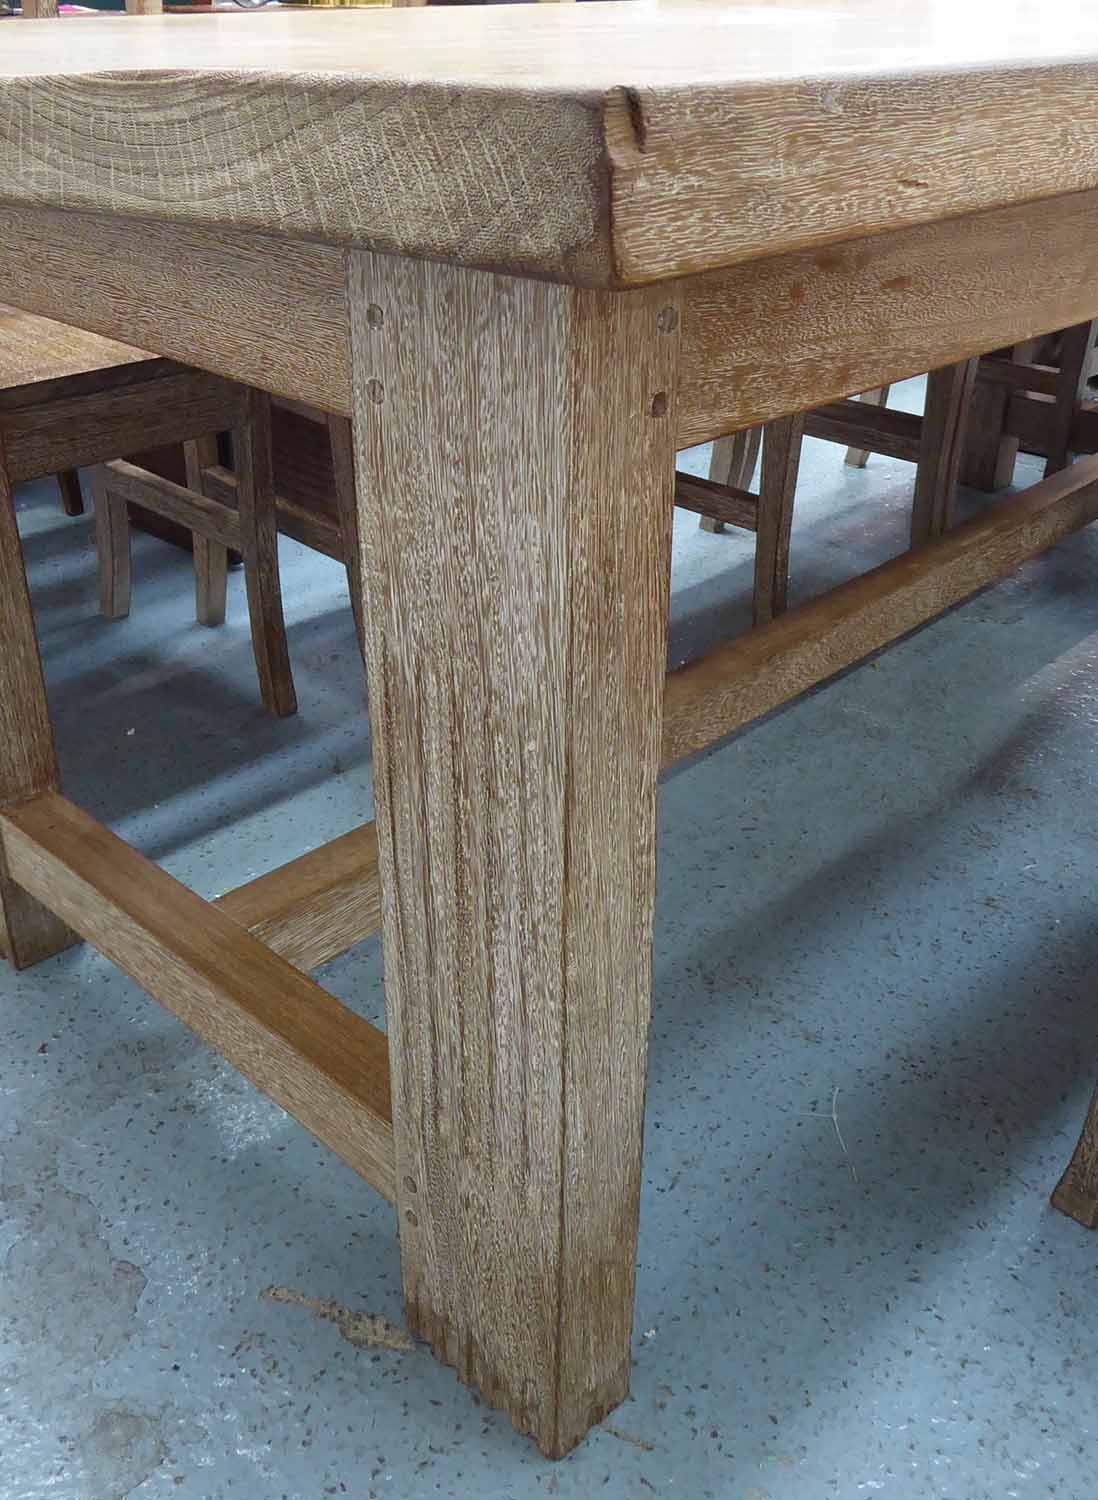 FARMHOUSE DINING TABLE, contemporary French provincal style, 210cm x 102cm x 81cm. - Image 2 of 3